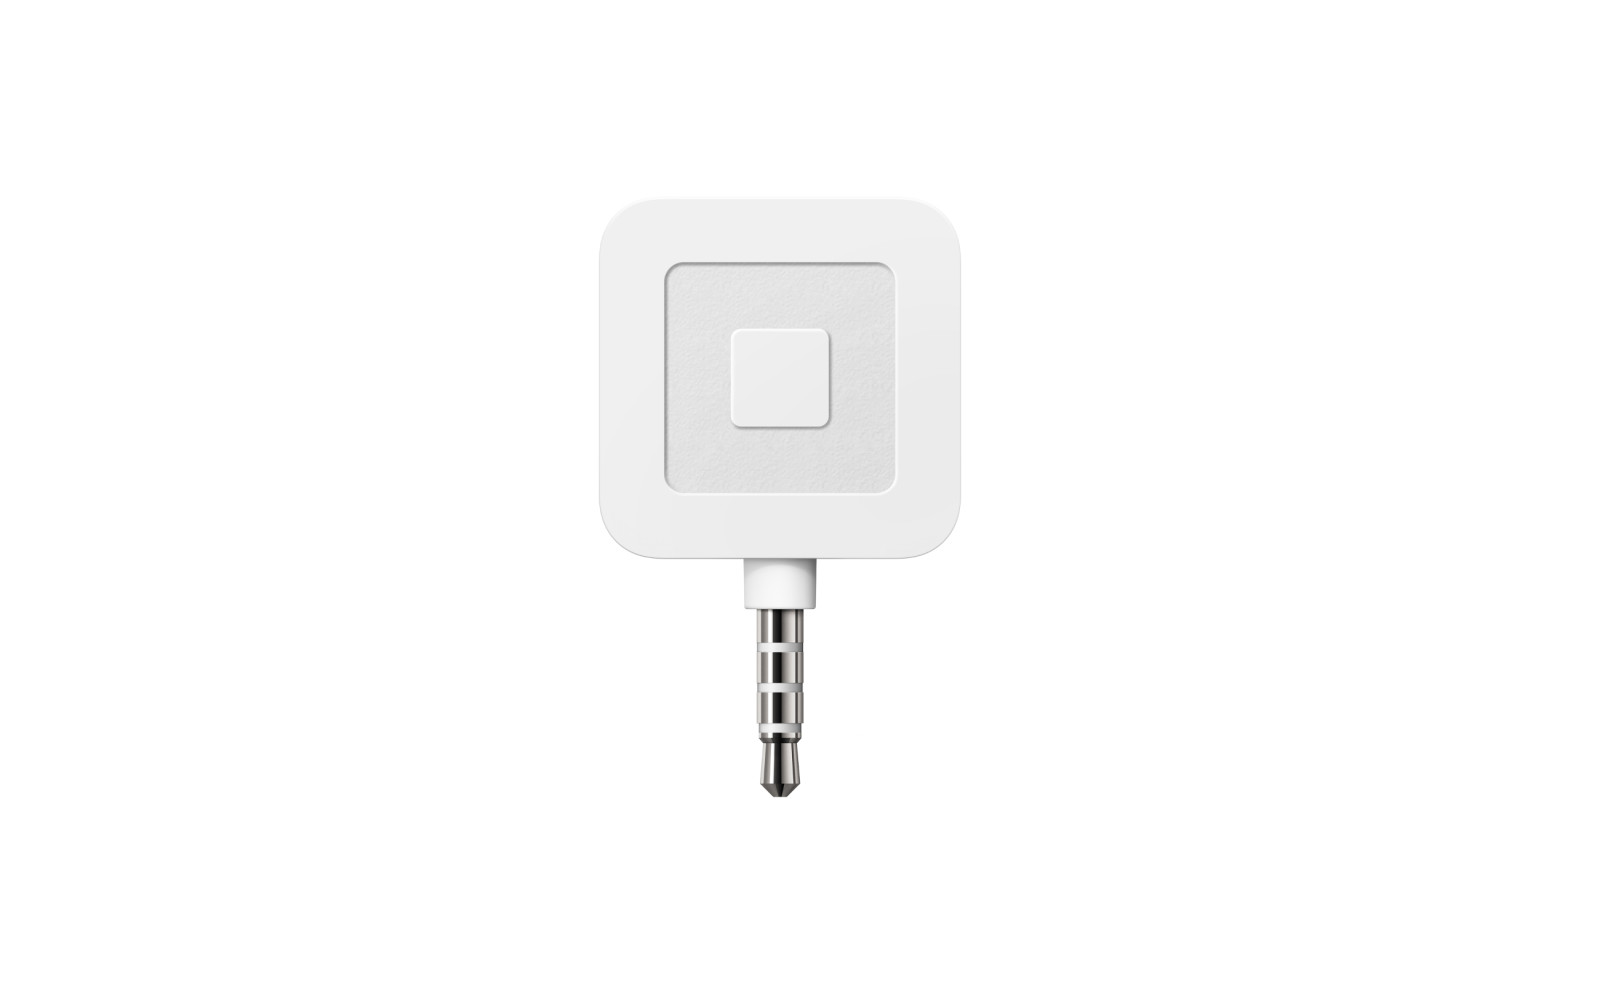 Free Credit Card Reader From Square Square Shop